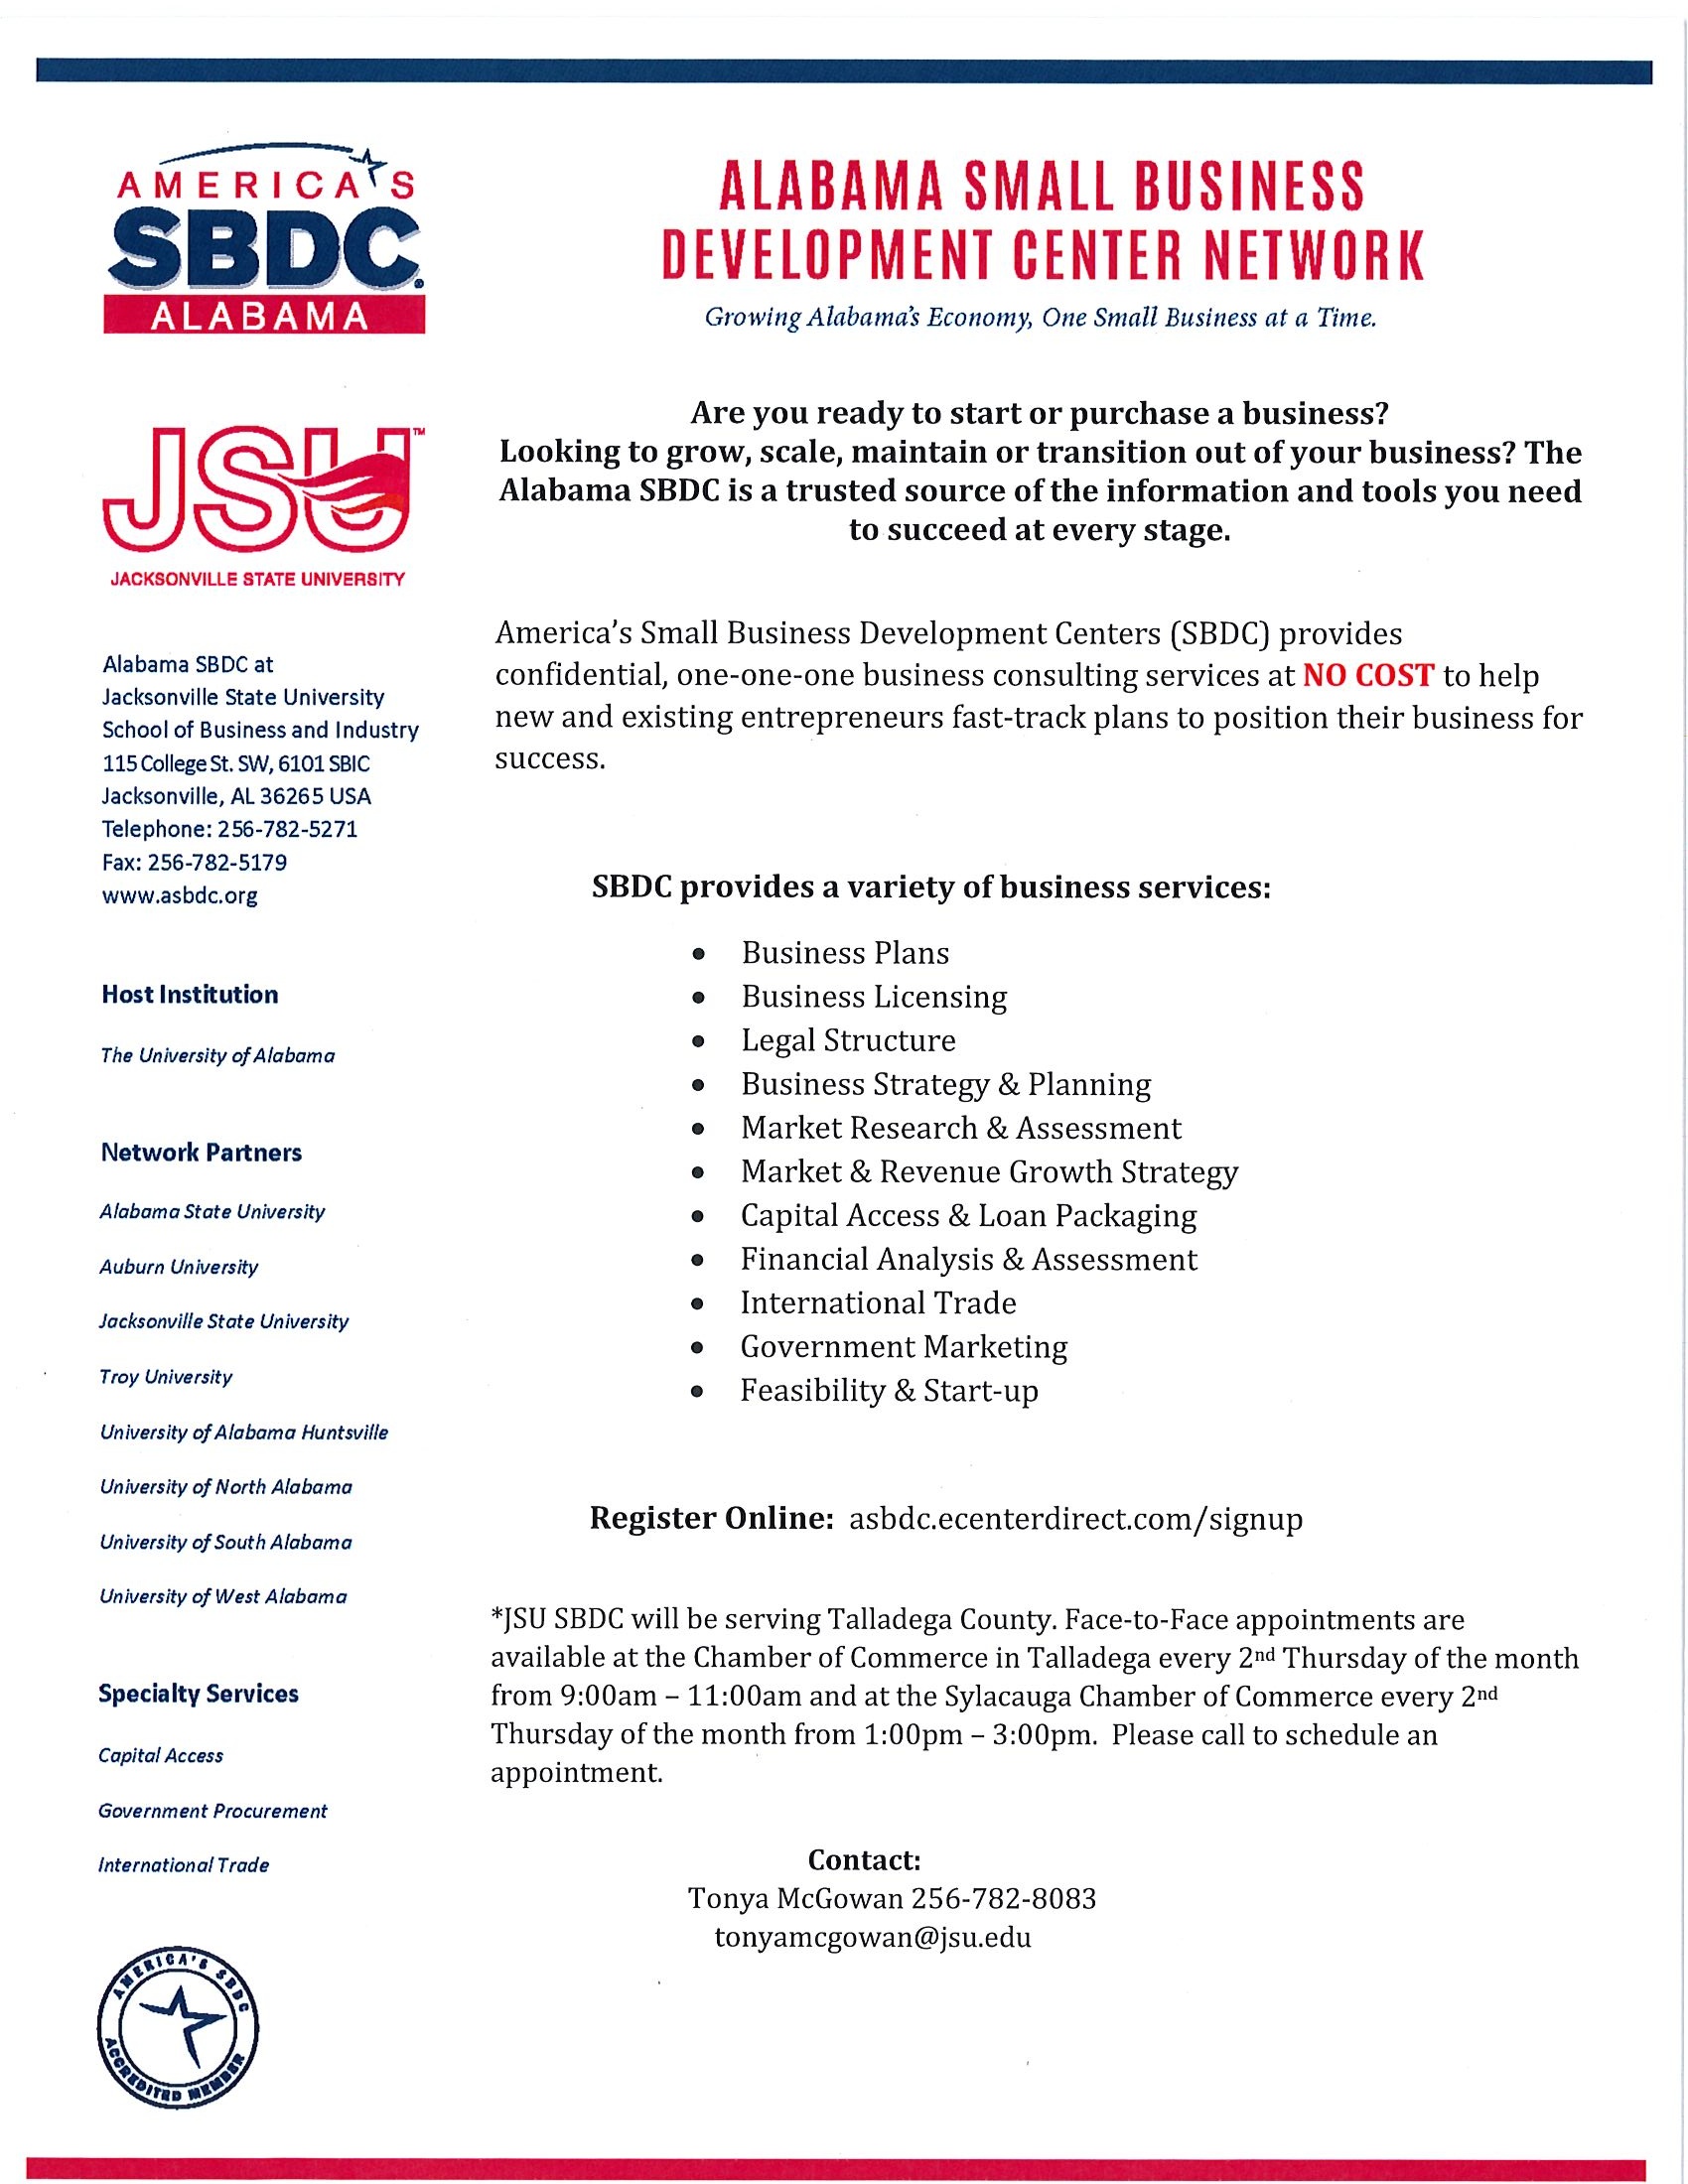 JSU Small Business Center helping business start ups at Sylacauga Chamber of Commerce